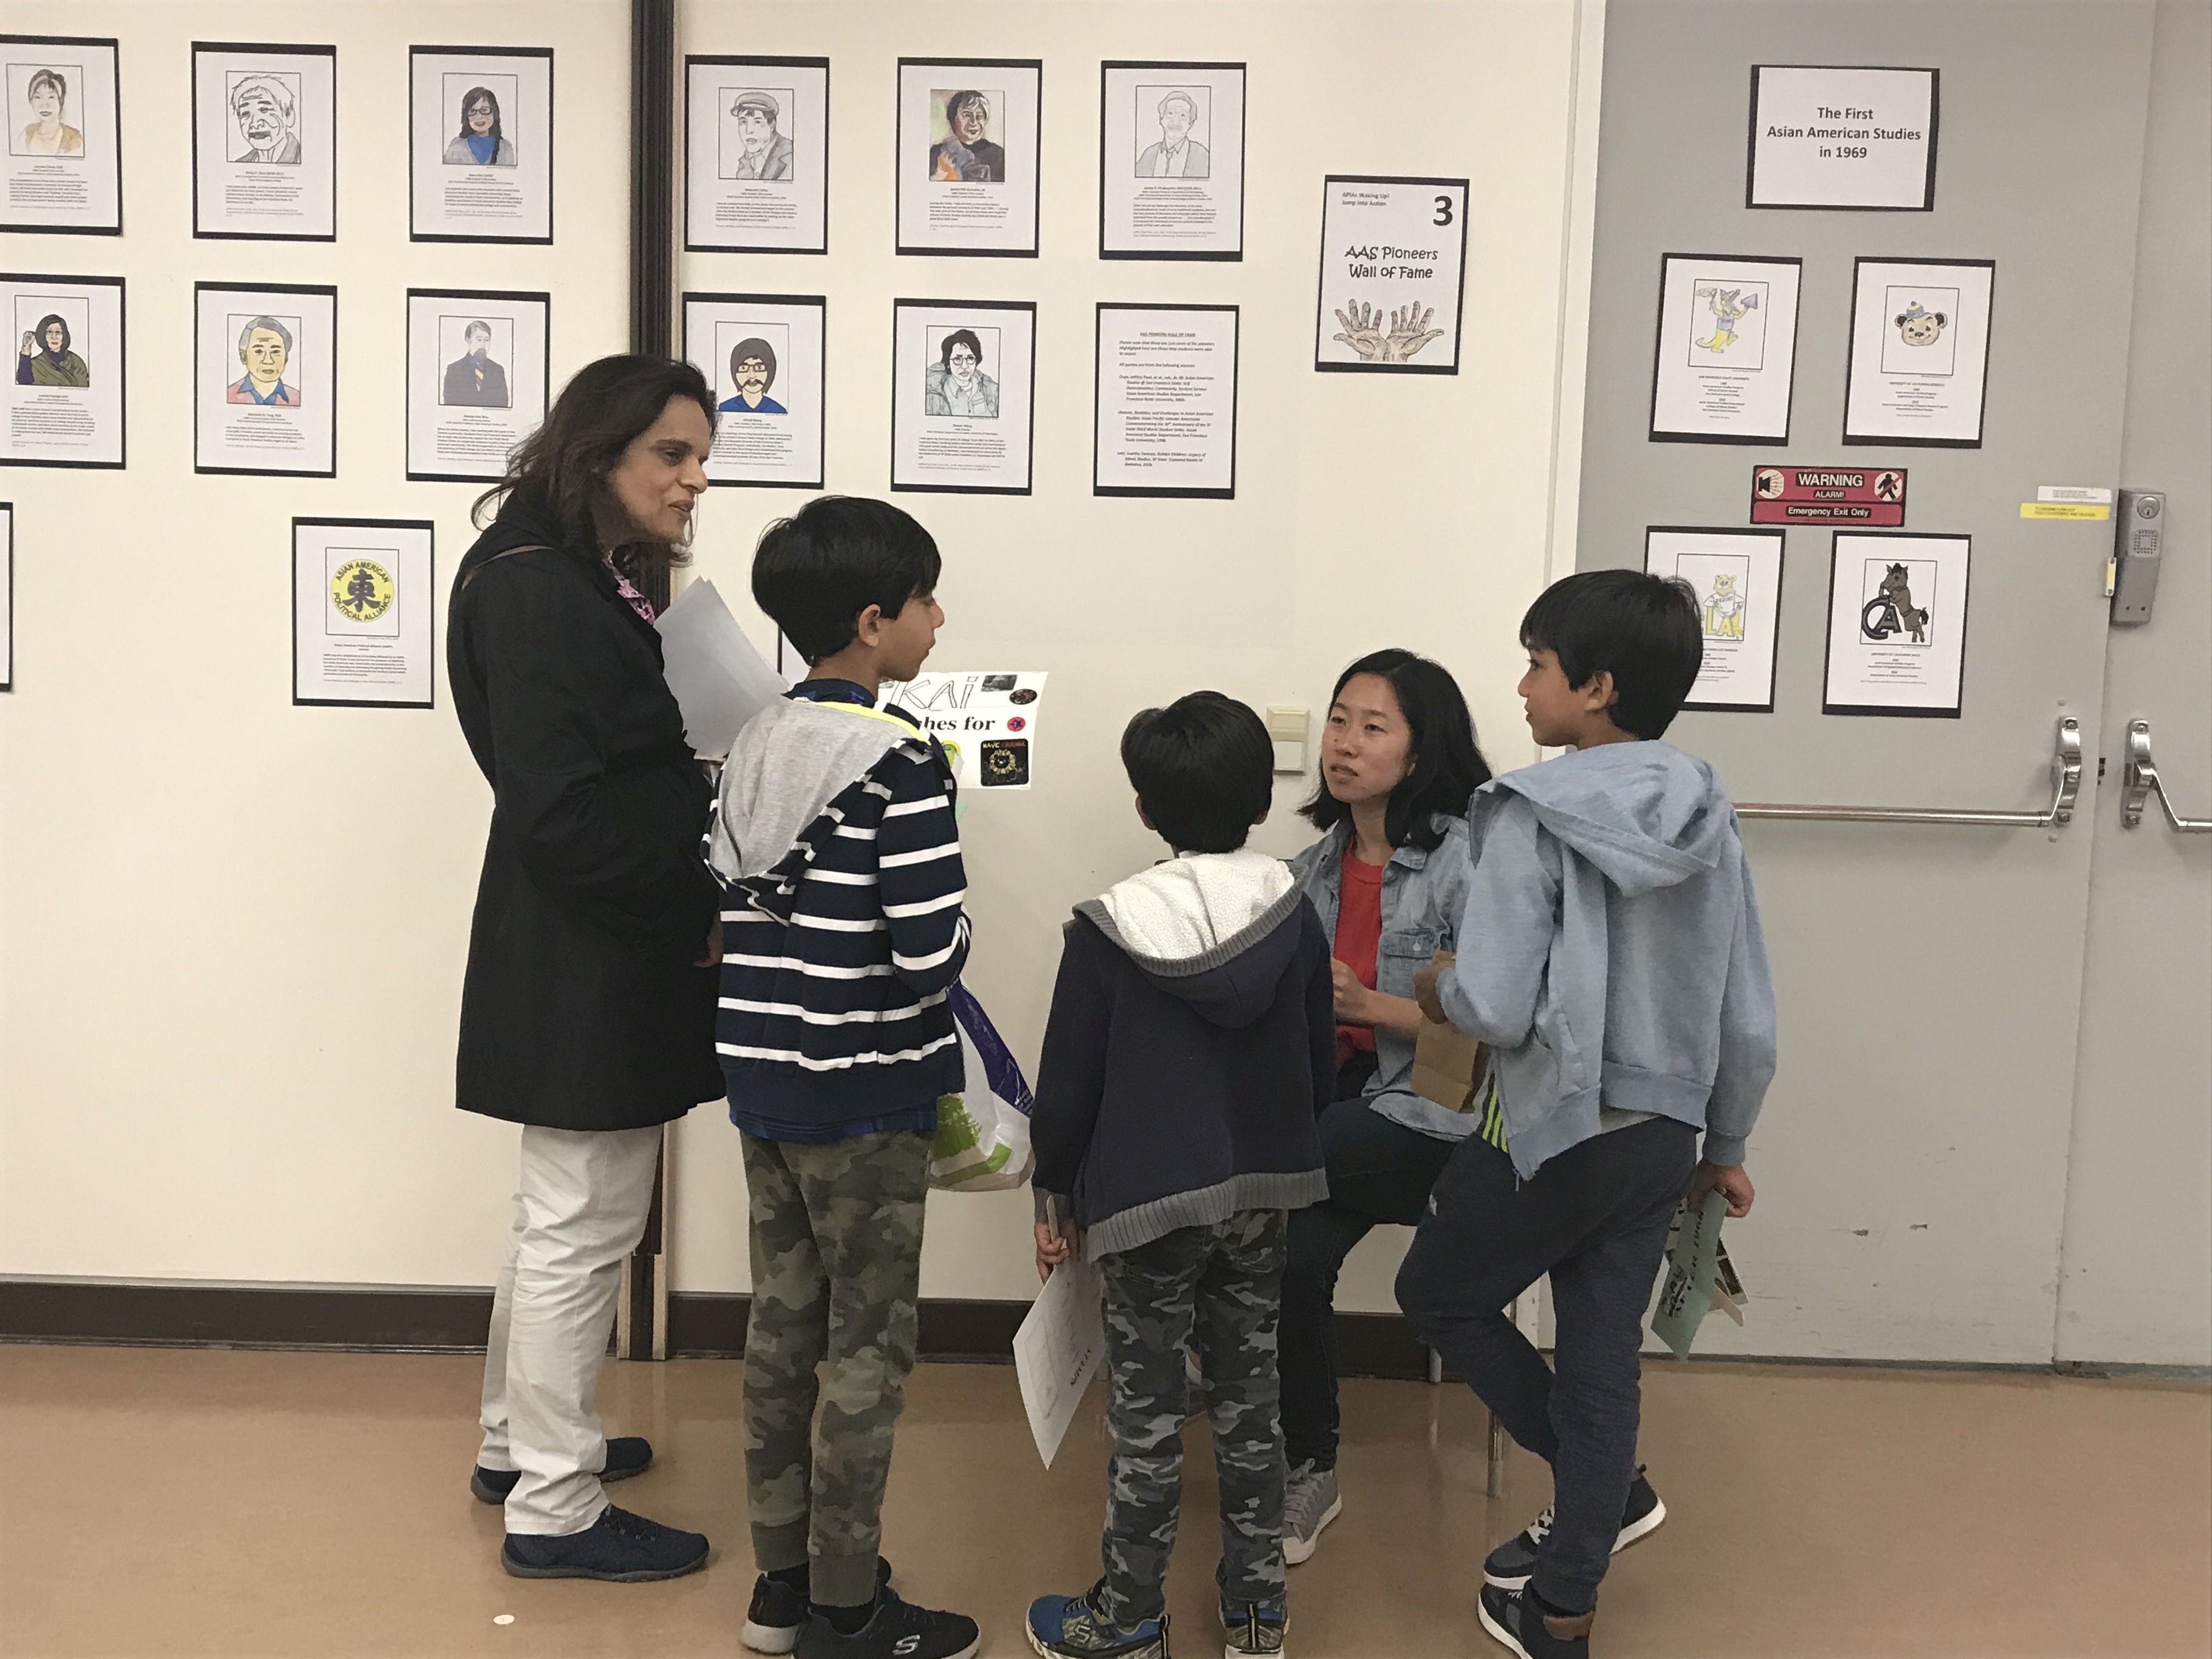 Student explains the Wall of Fame to 3 children as parent watches